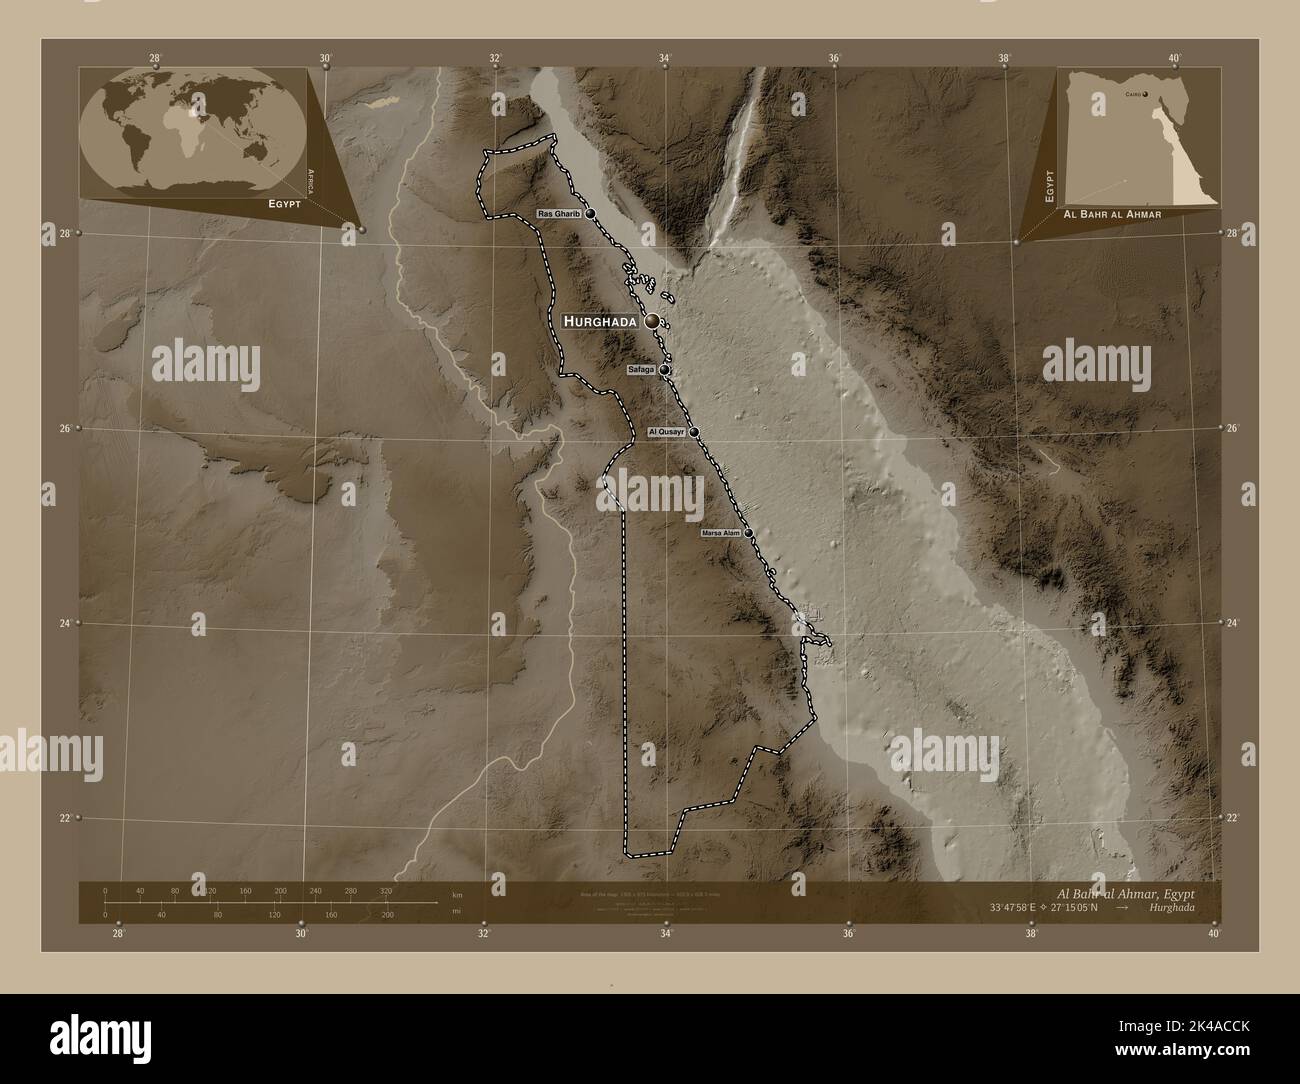 Al Bahr al Ahmar, governorate of Egypt. Elevation map colored in sepia tones with lakes and rivers. Locations and names of major cities of the region. Stock Photo